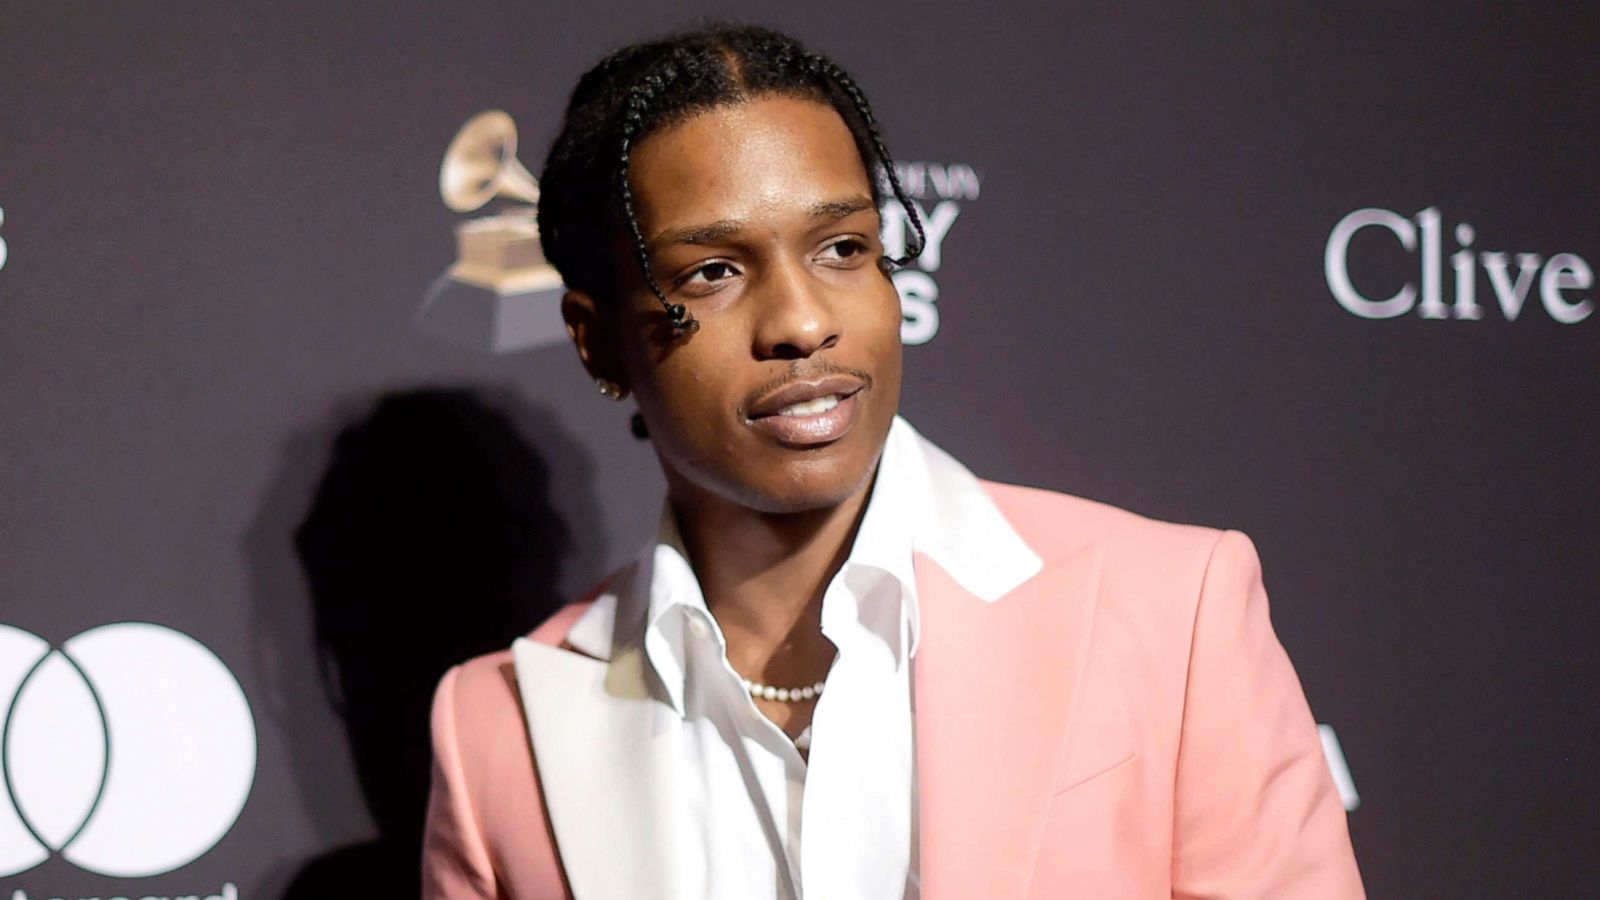 Trump says White House is helping rapper ASAP Rocky, who is being held in  Sweden without charges - ABC News